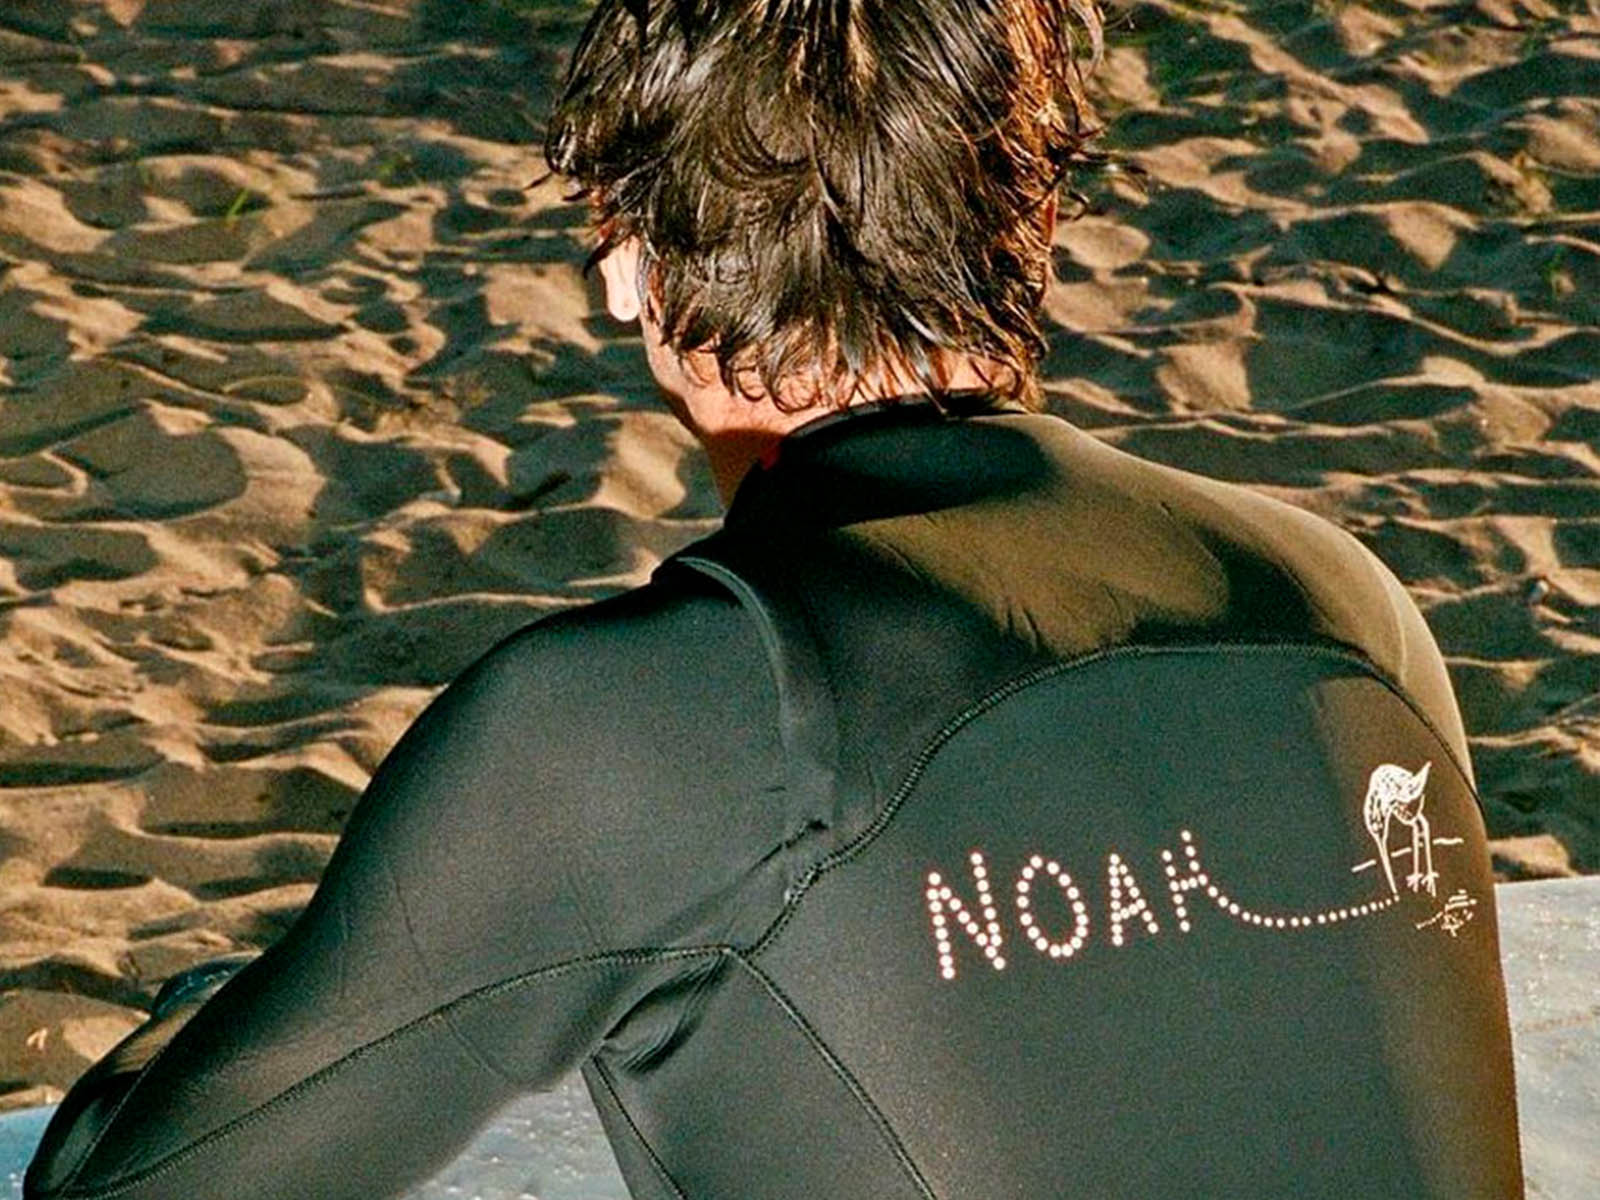 Surf in style with NOAH’s new wetsuits